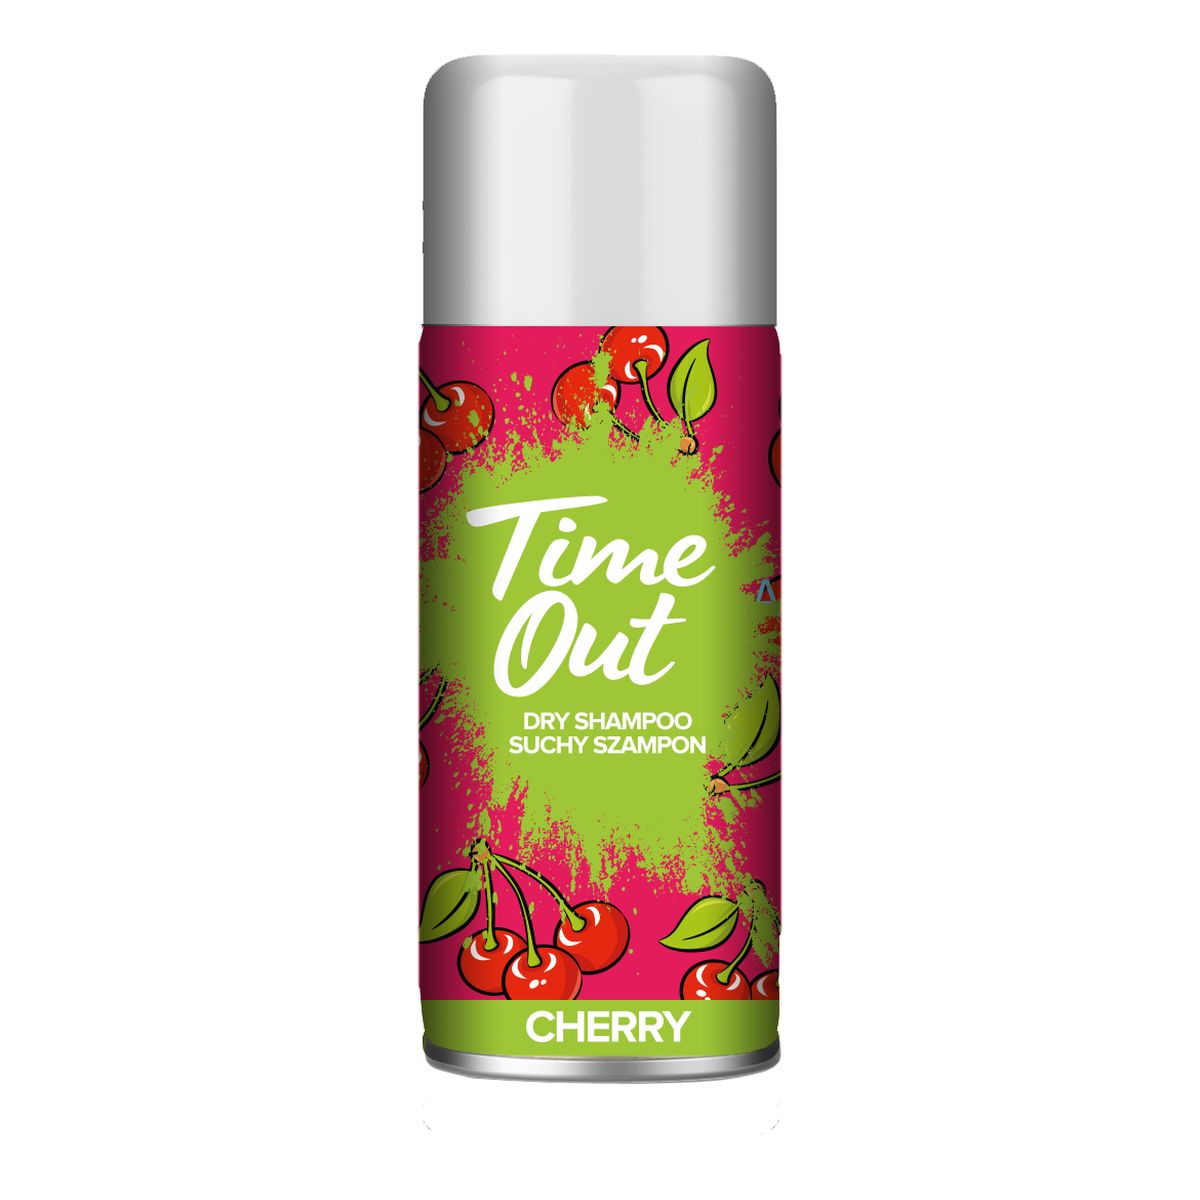 TIME OUT SUCHY SZAMPON CHERRY 75ml